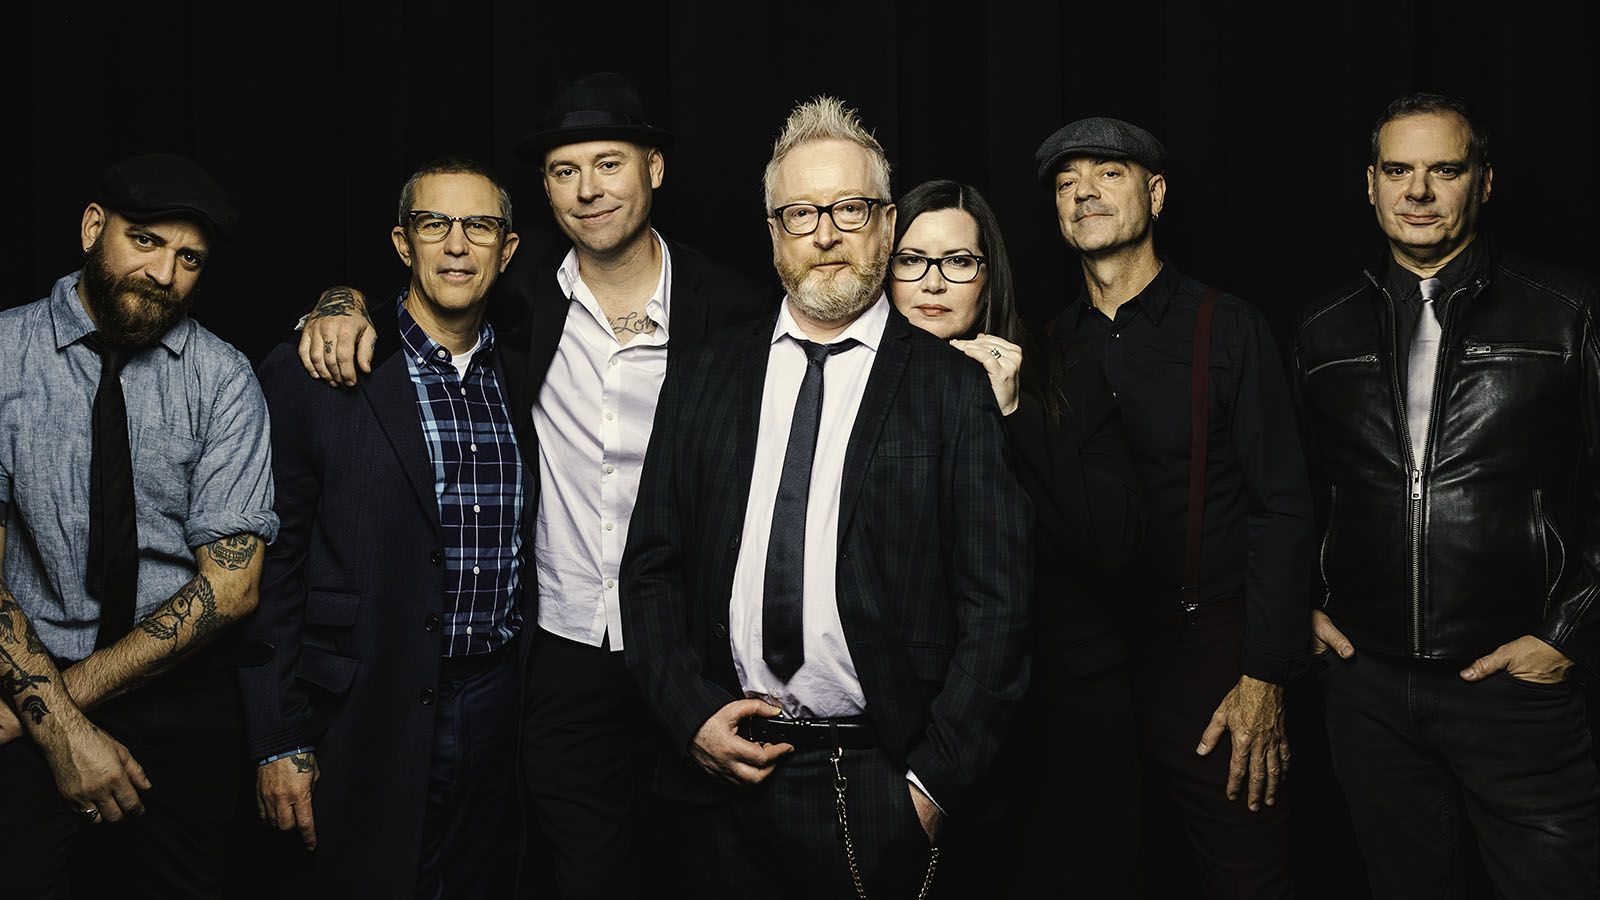 Irish rockers Flogging Molly will be joined by Anti-Flag and Skinny Lister when they visit The Clyde Theatre on March 5.